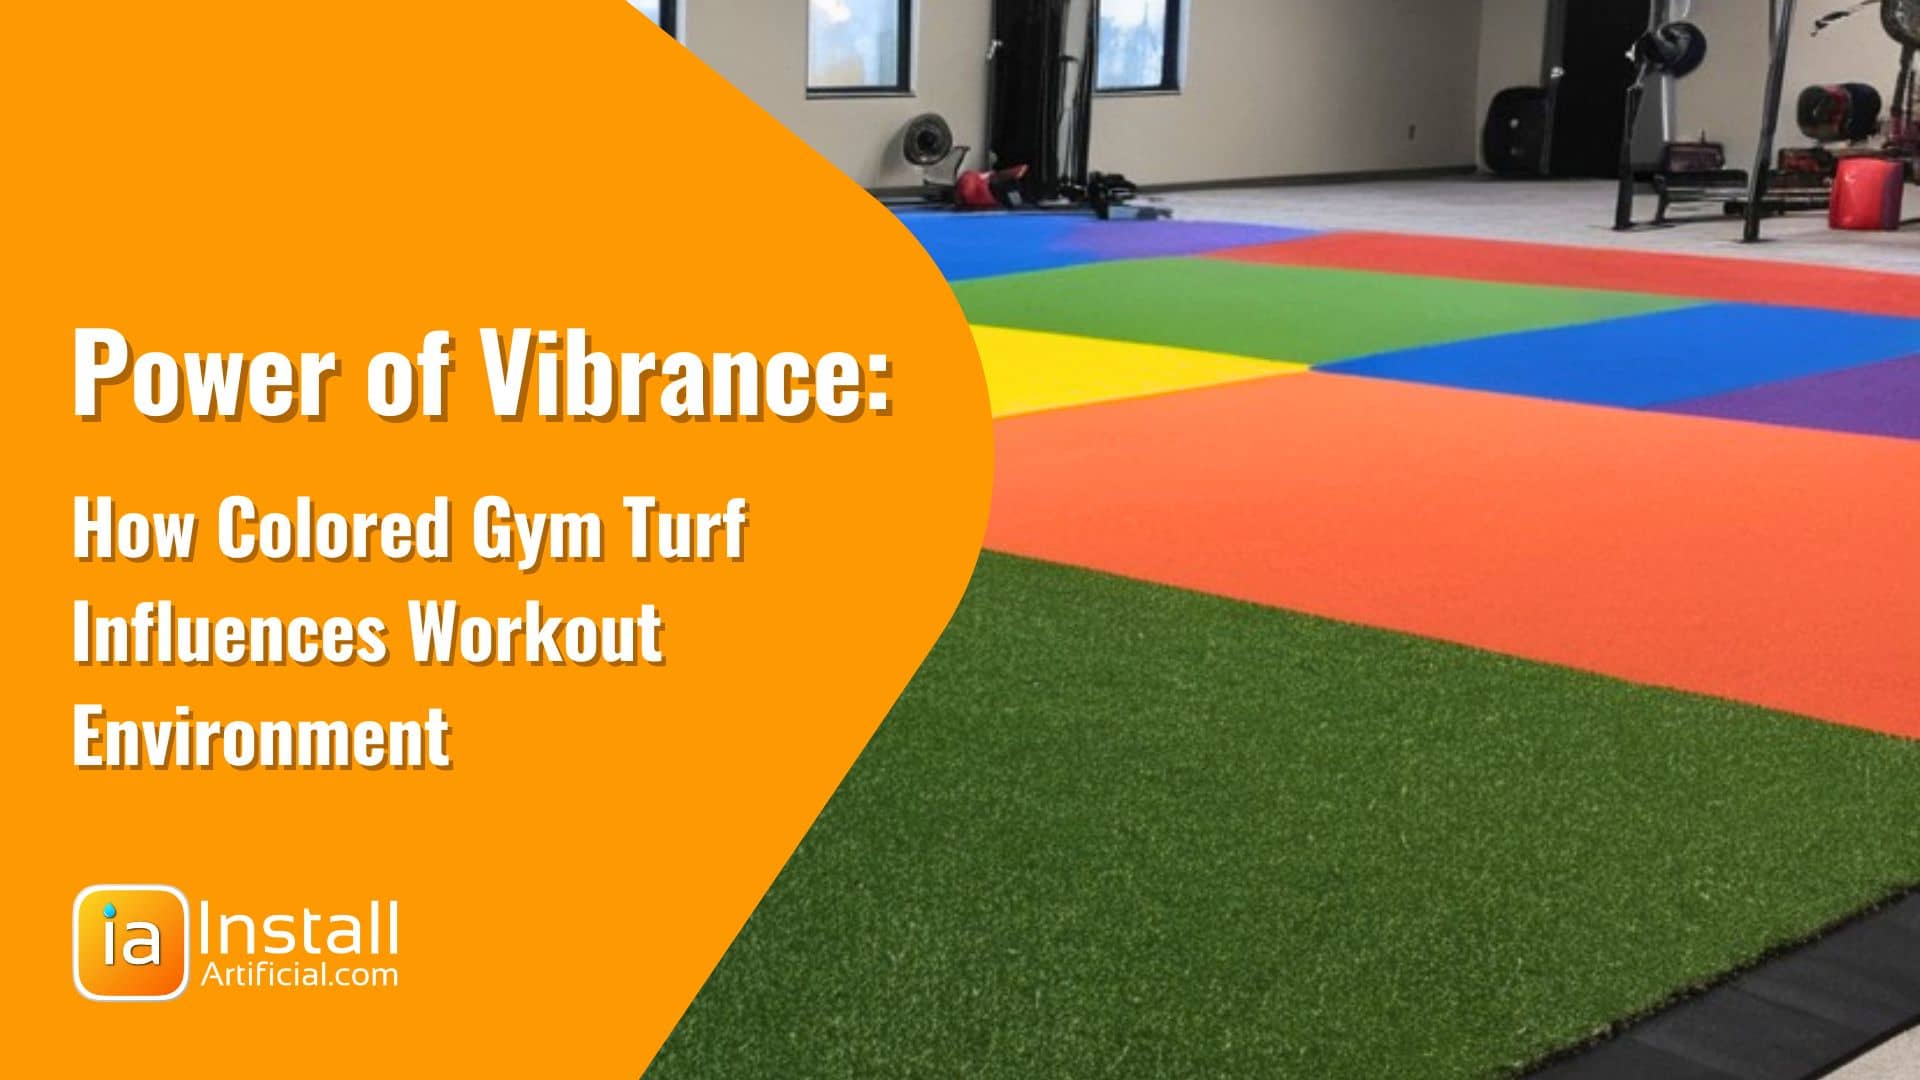 Power of Vibrance: How Colored Gym Turf Influences Workout Environment